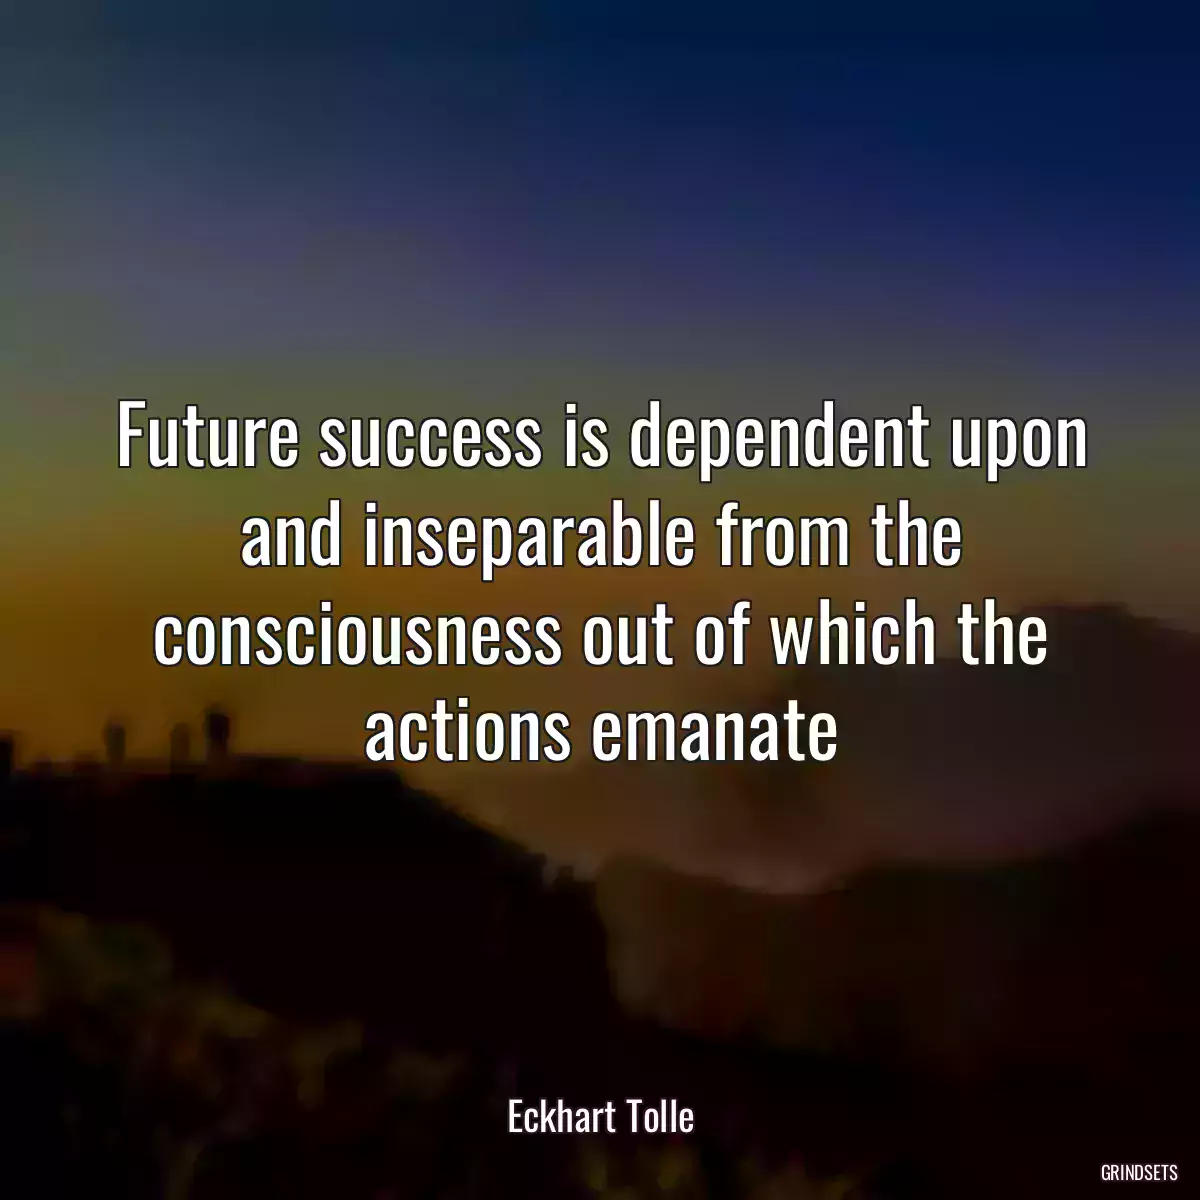 Future success is dependent upon and inseparable from the consciousness out of which the actions emanate